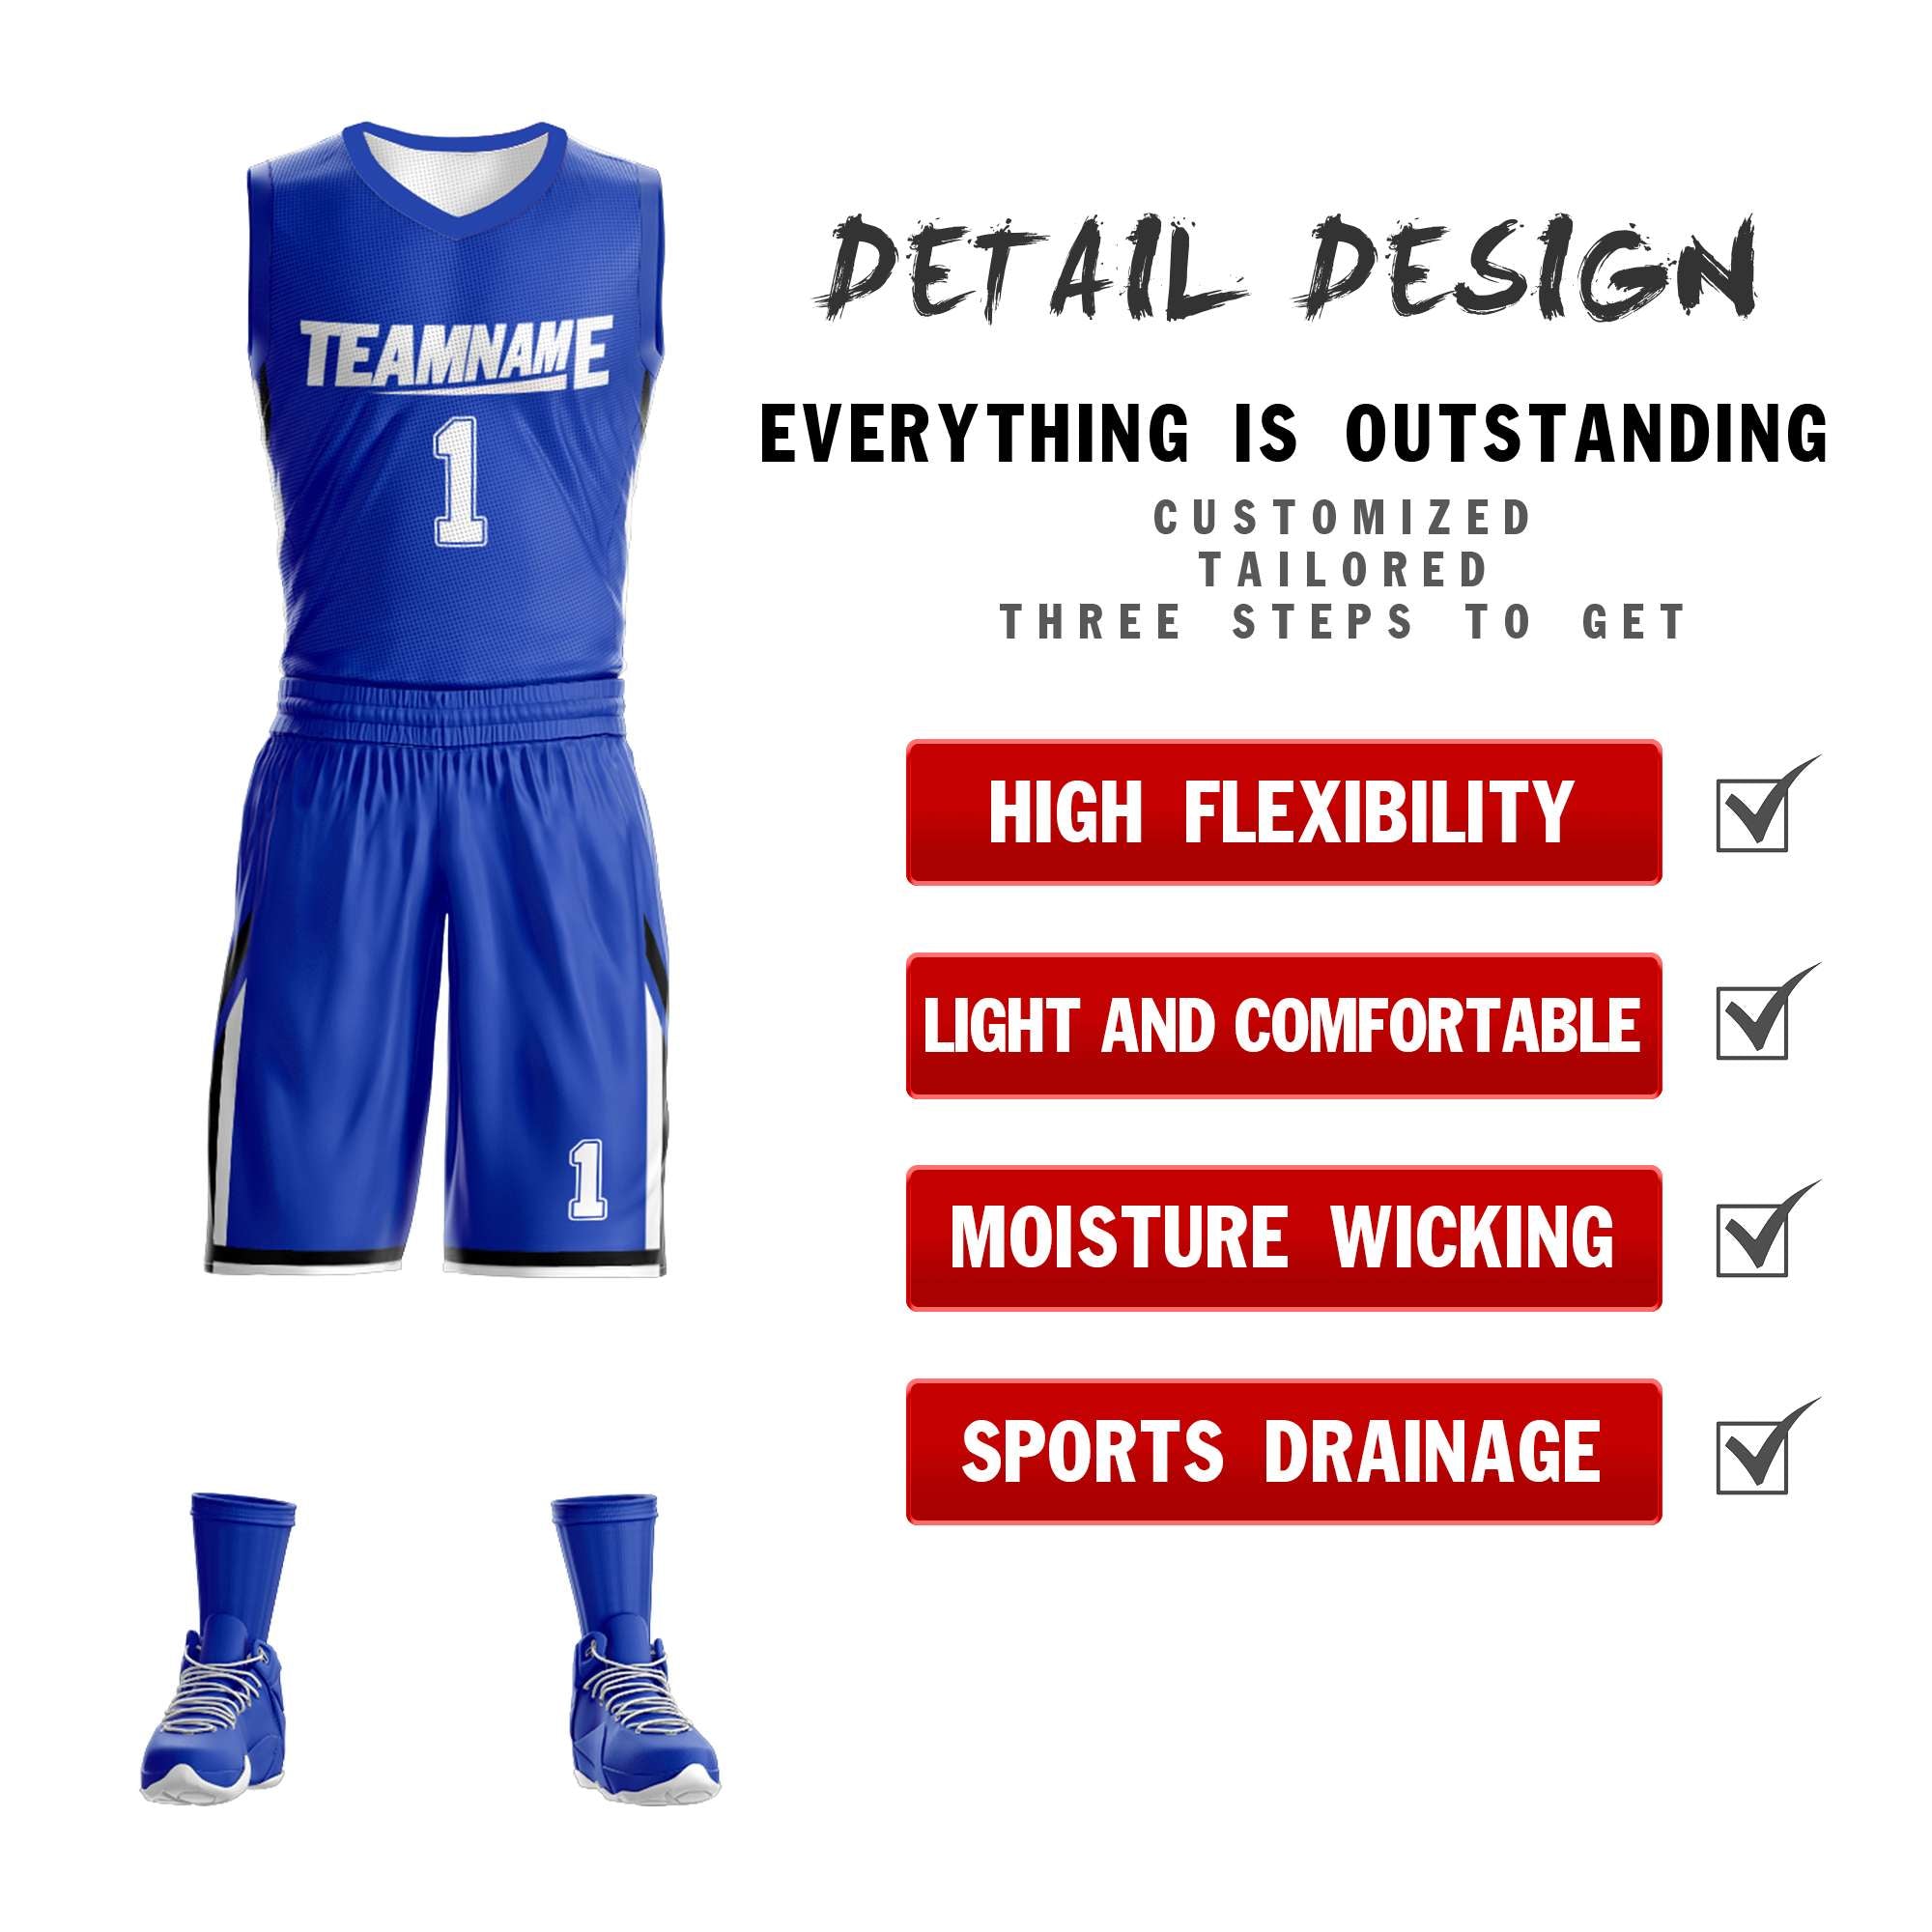 royal and white reversible basketball jersey design detail for team